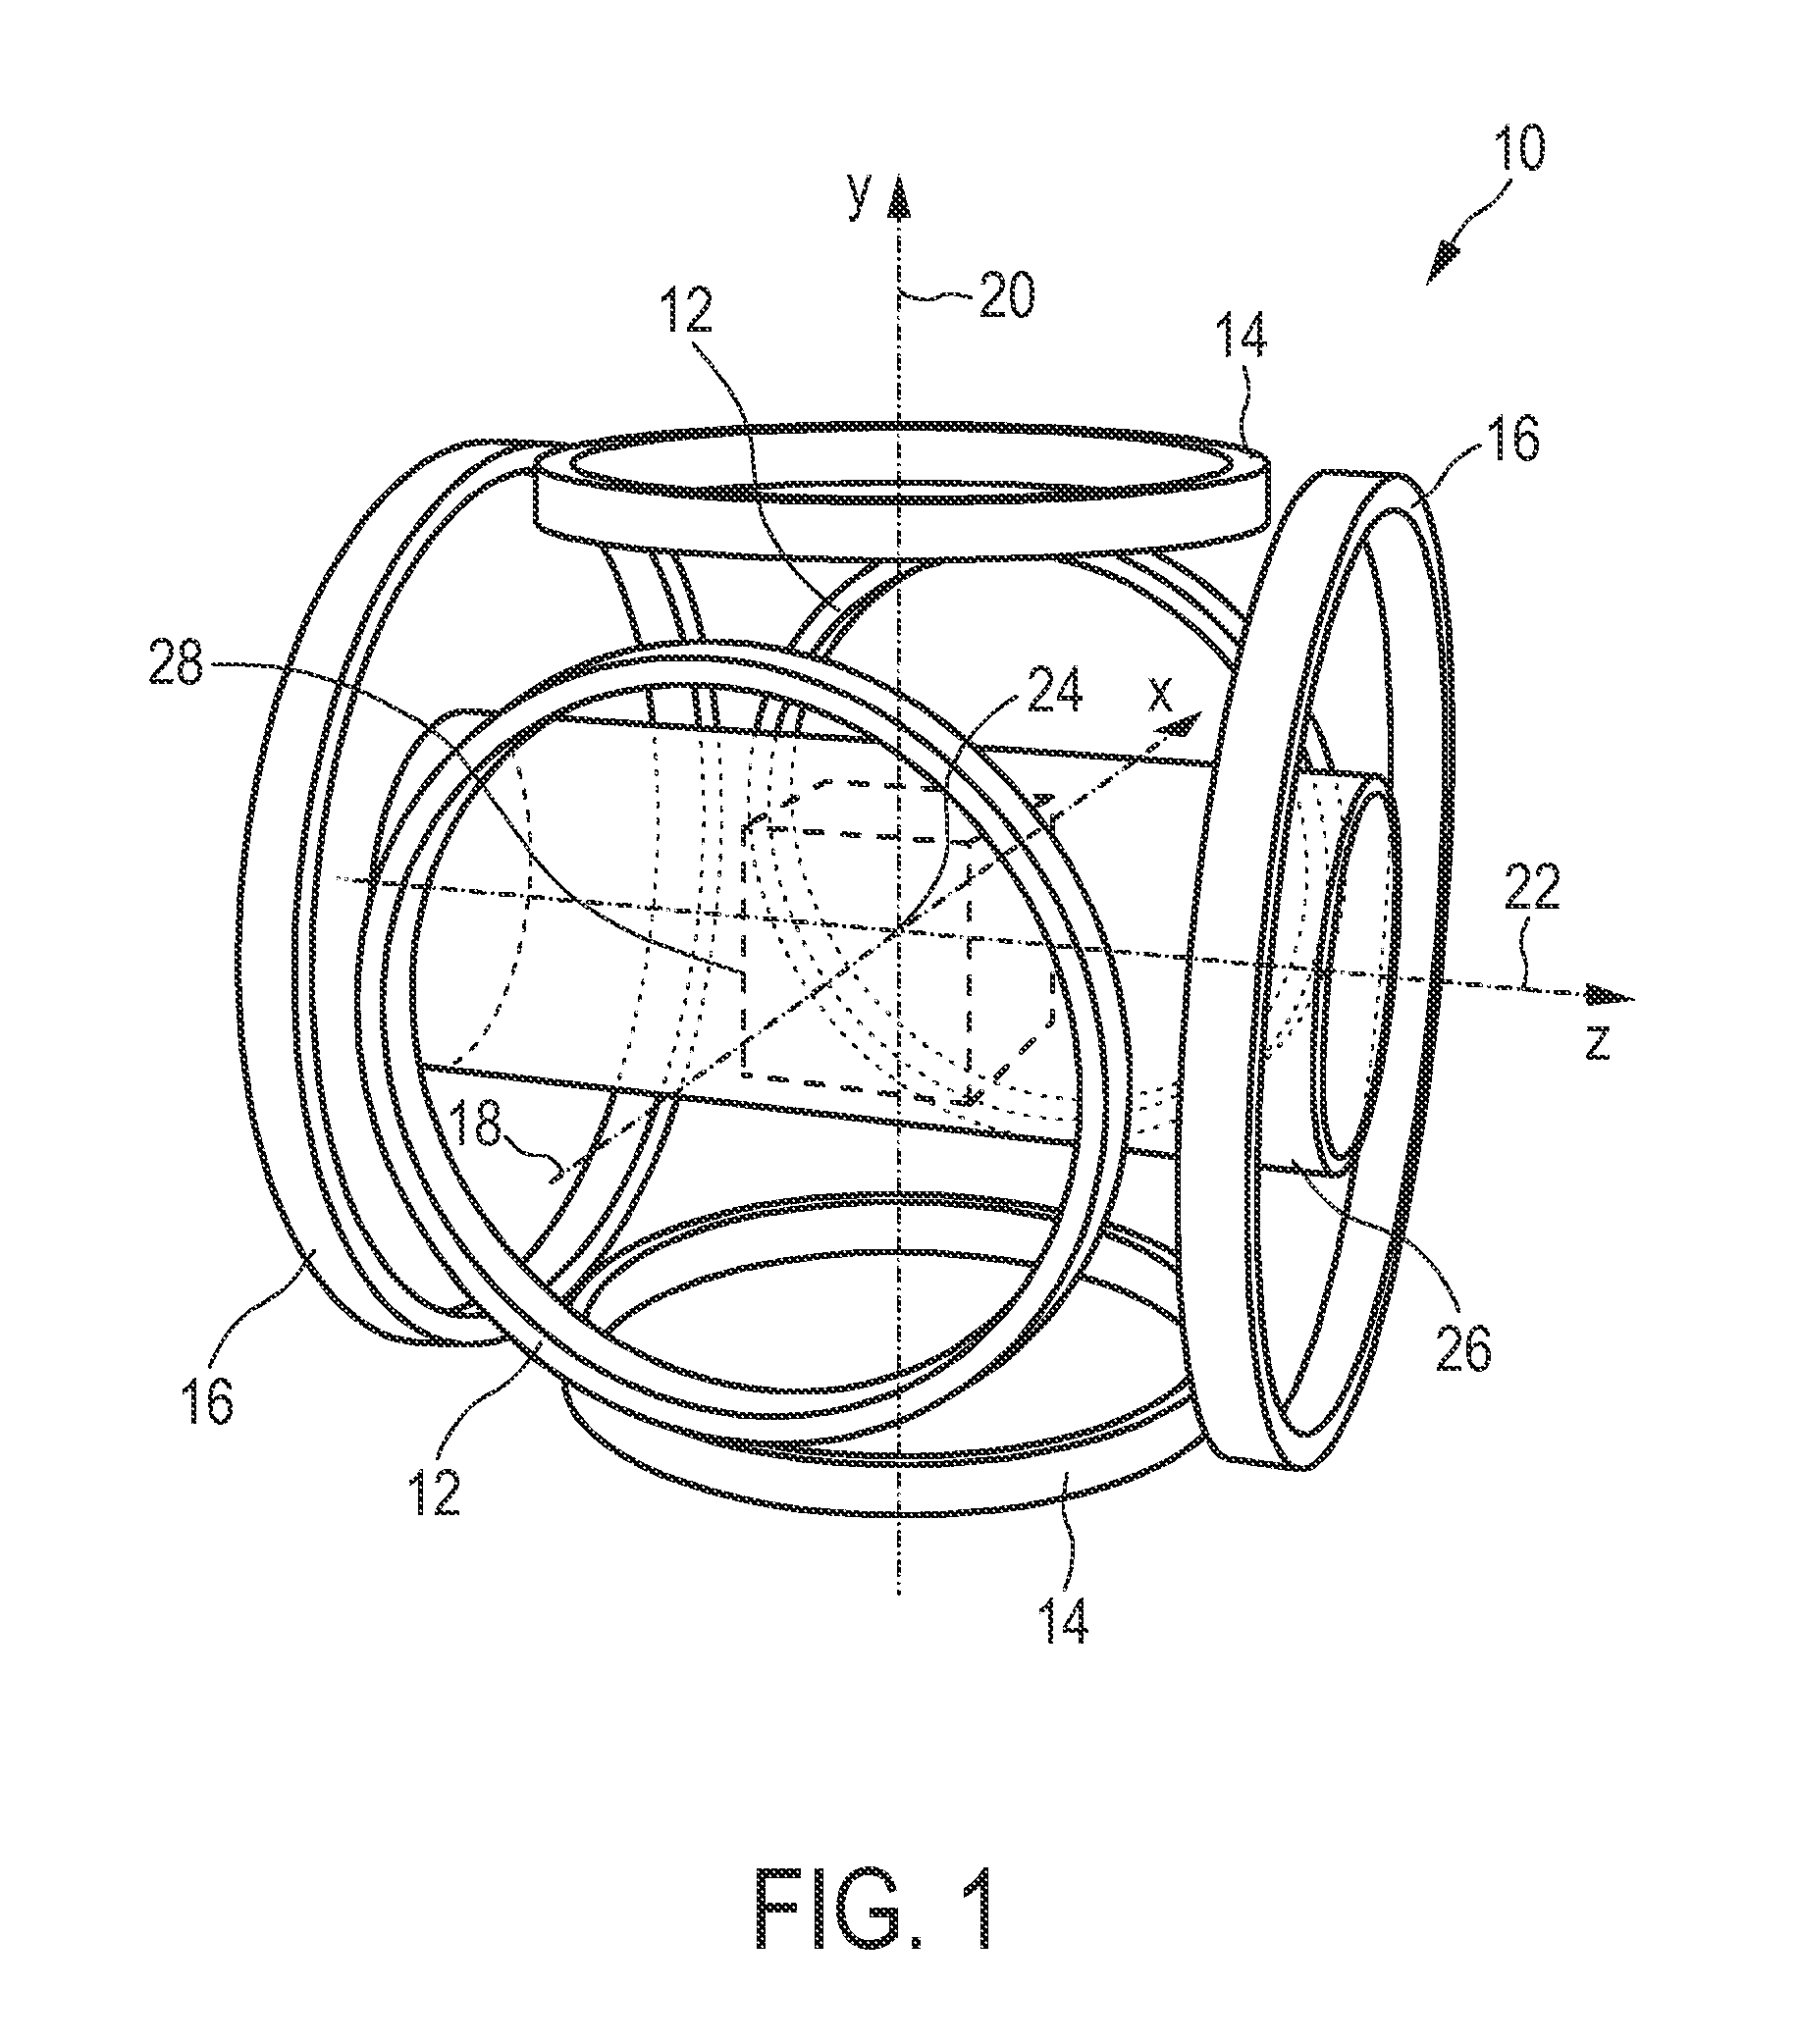 Apparatus and method for measuring the internal pressure of an examination object